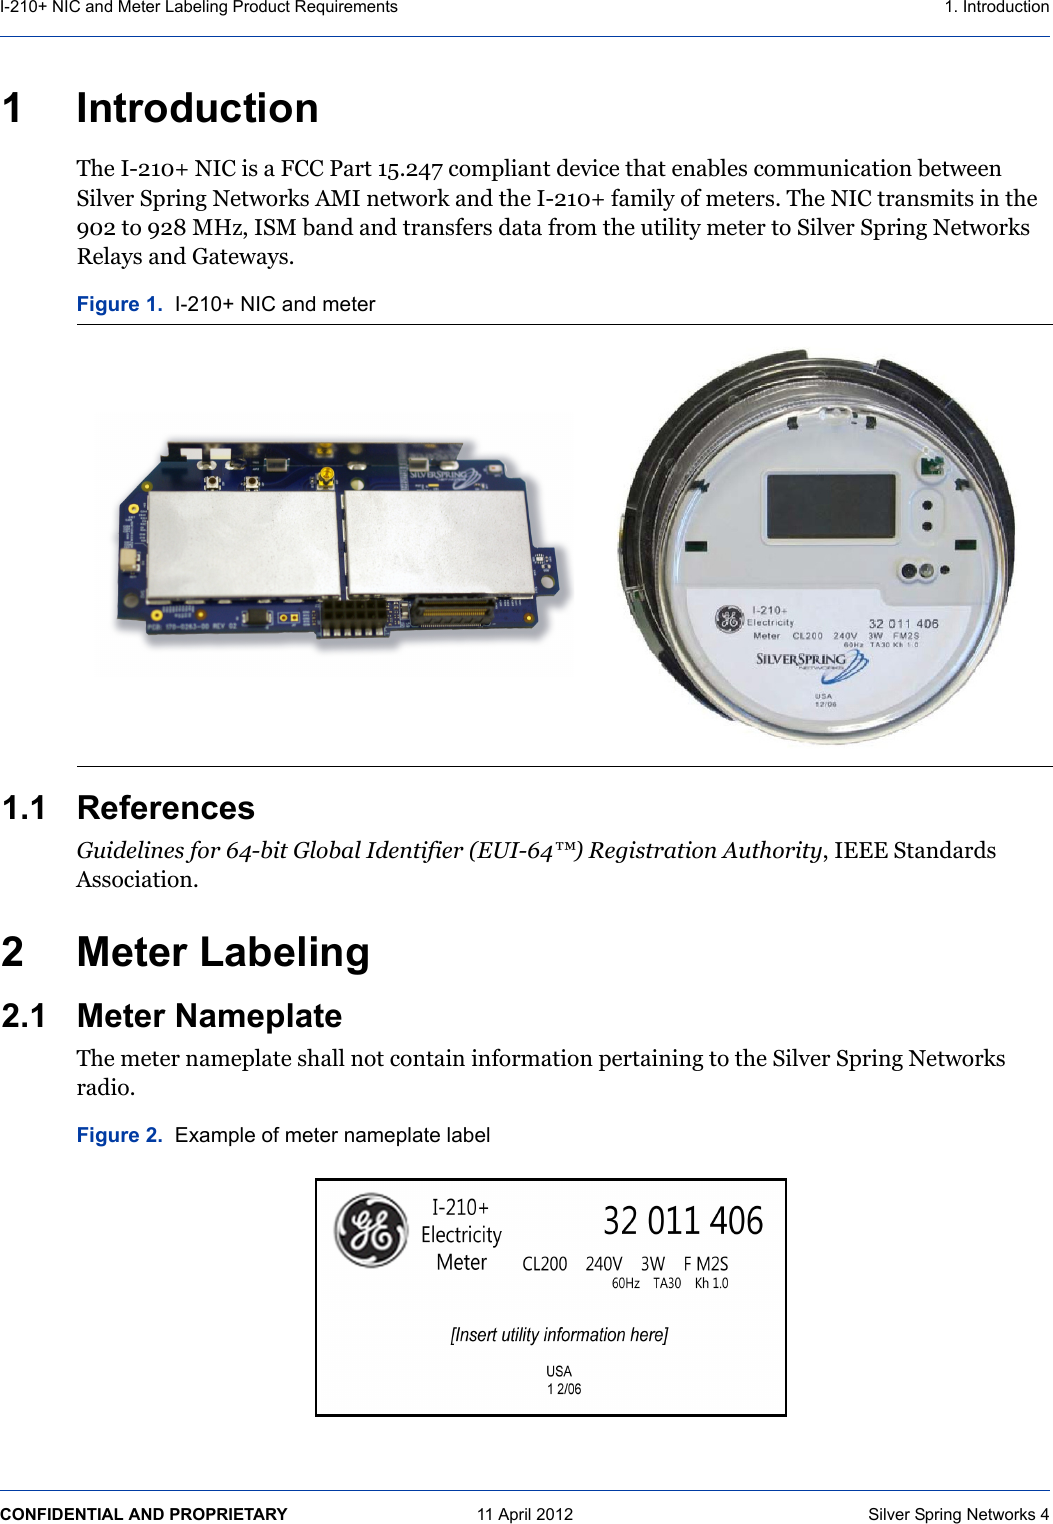 I-210+ NIC and Meter Labeling Product Requirements 1. IntroductionCONFIDENTIAL AND PROPRIETARY  11 April 2012  Silver Spring Networks 41 Introduction !&quot;#$%&amp;&apos;()*$+%,$-.$/$0,,$1/23$(45&apos;67$89:;&lt;-/=3$&gt;#?-8#$3&quot;/3$#=/@&lt;#.$89::A=-8/3-9=$@#3B##=$C-&lt;?#2$C;2-=D$+#3B92E.$FG%$=#3B92E$/=&gt;$3&quot;#$%&amp;&apos;()*$H/:-&lt;I$9H$:#3#2.5$!&quot;#$+%,$32/=.:-3.$-=$3&quot;#$J)&apos;$39$J&apos;K$GLMN$%CG$@/=&gt;$/=&gt;$32/=.H#2.$&gt;/3/$H29:$3&quot;#$A3-&lt;-3I$:#3#2$39$C-&lt;?#2$C;2-=D$+#3B92E.$O#&lt;/I.$/=&gt;$P/3#B/I.51.1 ReferencesGuidelines for 64-bit Global Identifier (EUI-647) Registration AuthorityN$%QQQ$C3/=&gt;/2&gt;.$F..98-/3-9=52 Meter Labeling 2.1 Meter Nameplate!&quot;#$:#3#2$=/:#;&lt;/3#$.&quot;/&lt;&lt;$=93$89=3/-=$-=H92:/3-9=$;#23/-=-=D$39$3&quot;#$C-&lt;?#2$C;2-=D$+#3B92E.$2/&gt;-95Figure 1.  I-210+ NIC and meterFigure 2.  Example of meter nameplate label